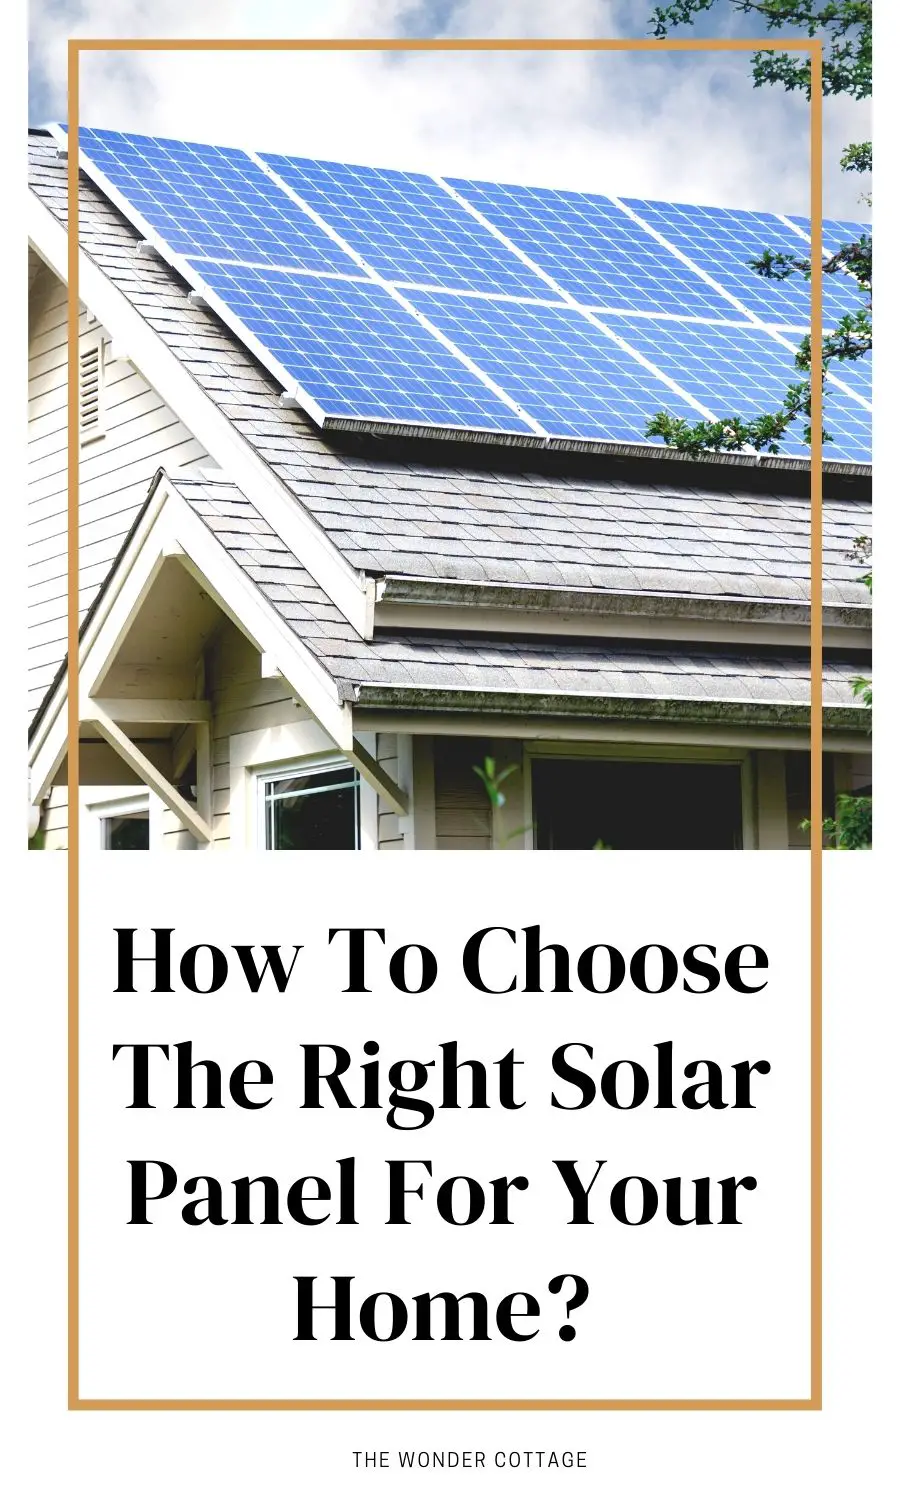 How To Choose The Right Solar Panel For Your Home?